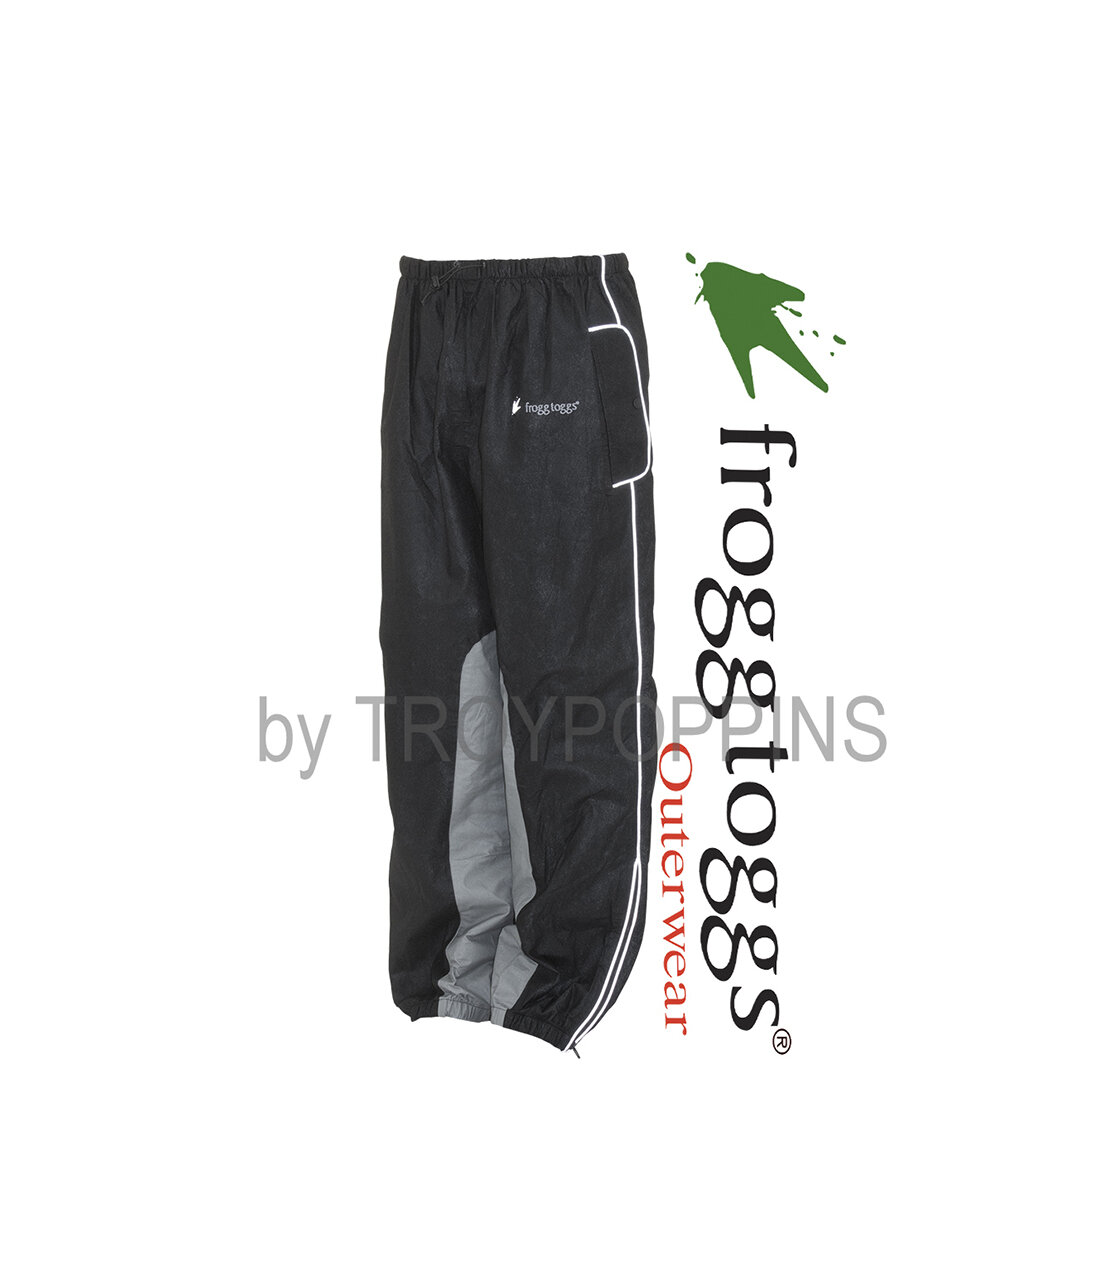 Frogg Toggs Road Toad Reflective Water-Resistant Rain Pant 